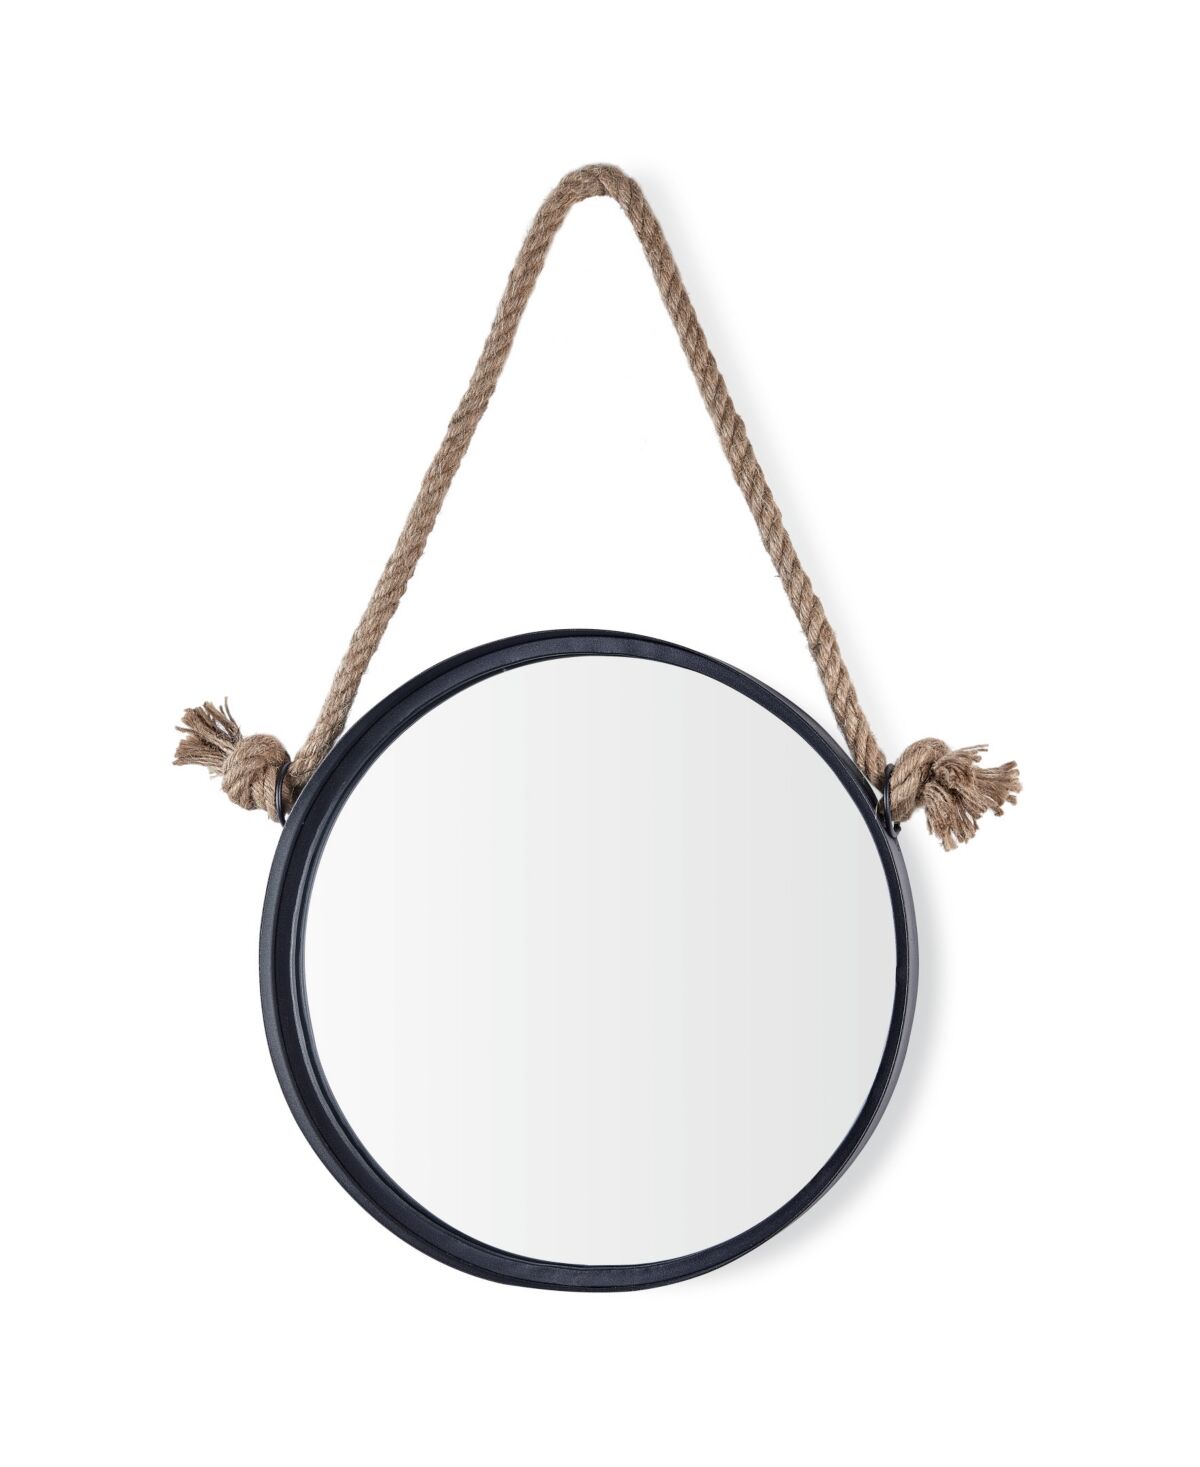 Danya B Round Accent Mirror with Hanging Rope - Black